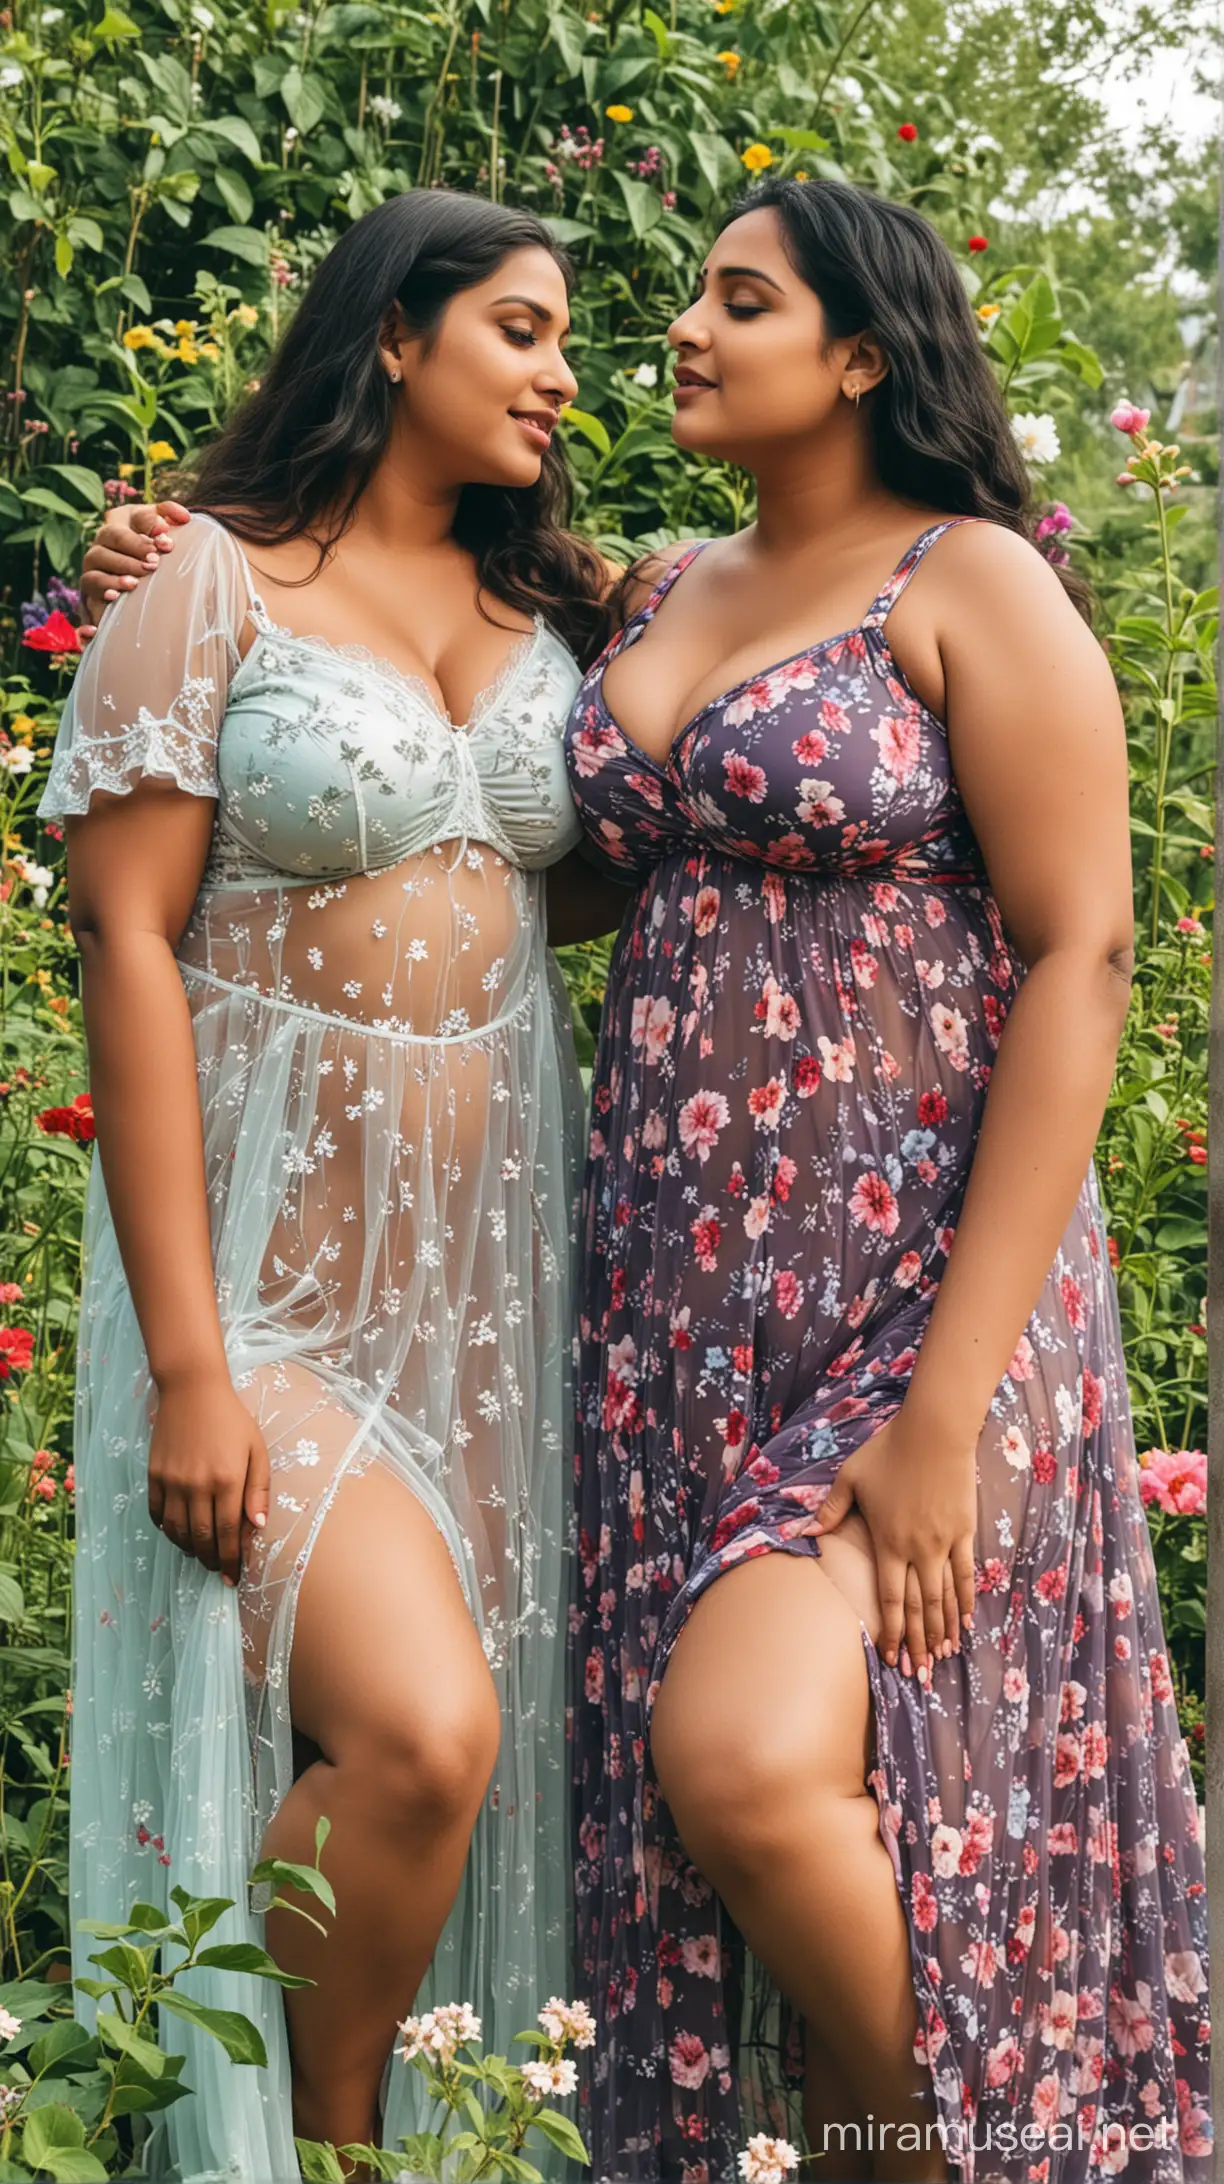 plus size indian curvy women lesbian biggest boobs big bust with net nighty on the flower garden background looking at each other lovingly with flowers. Their eyes are open and one of them has a prosthetic arm